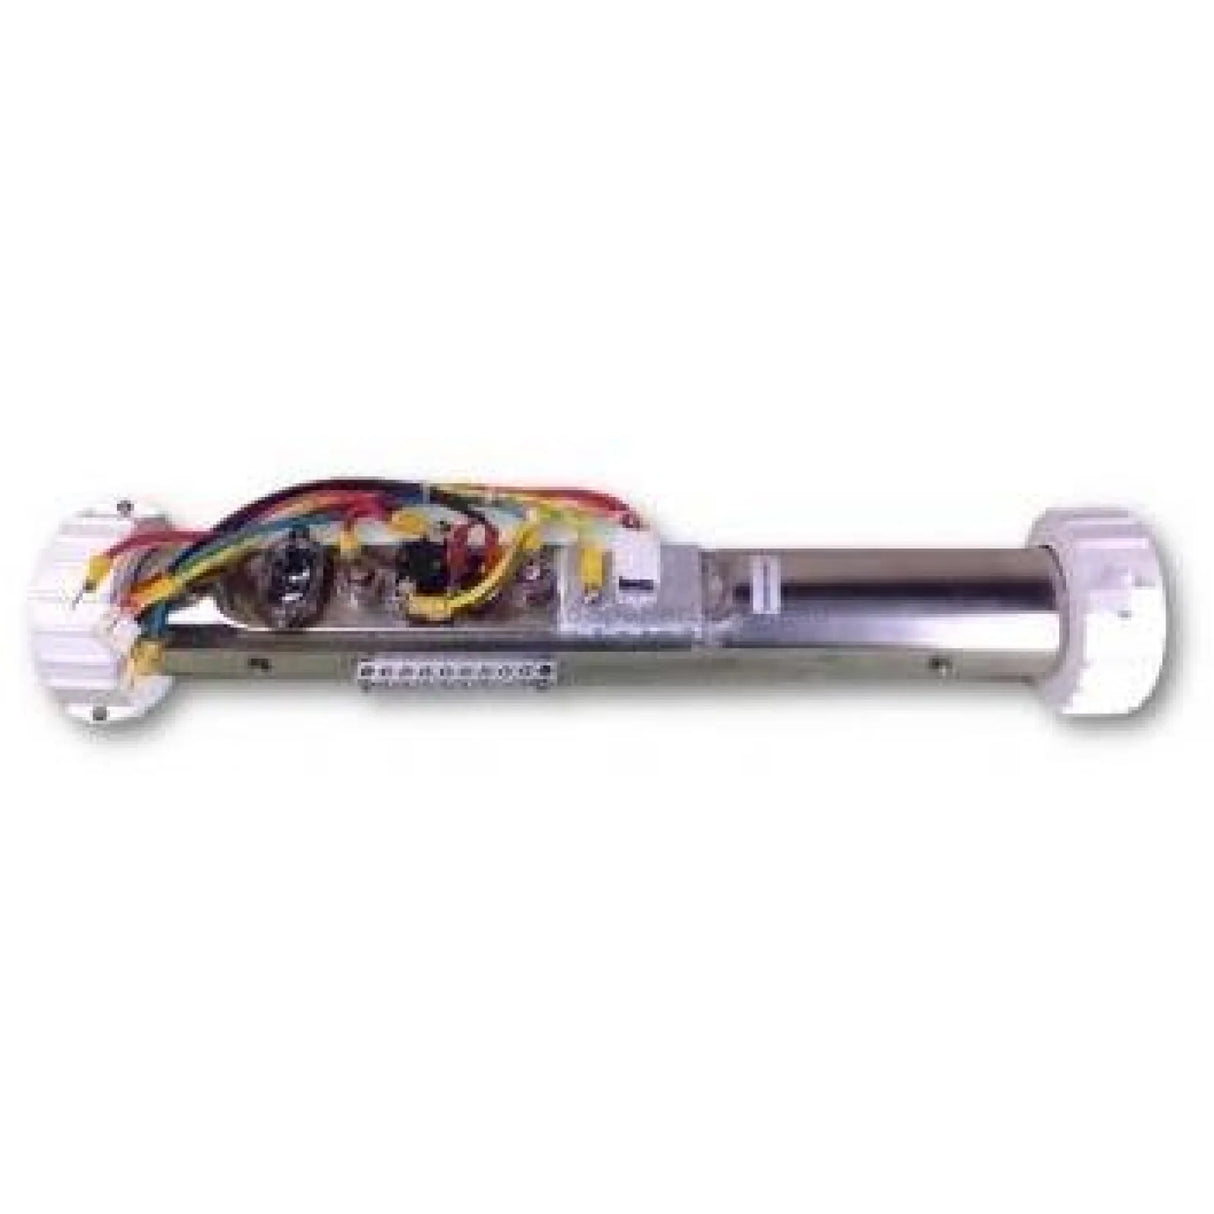 SpaNET SV2, SV3, SV4 - Variable Output Heater Assembly - 3kW / 5.5kW / 6kW - V1 & V2 Heaters - Heater and Spa Parts